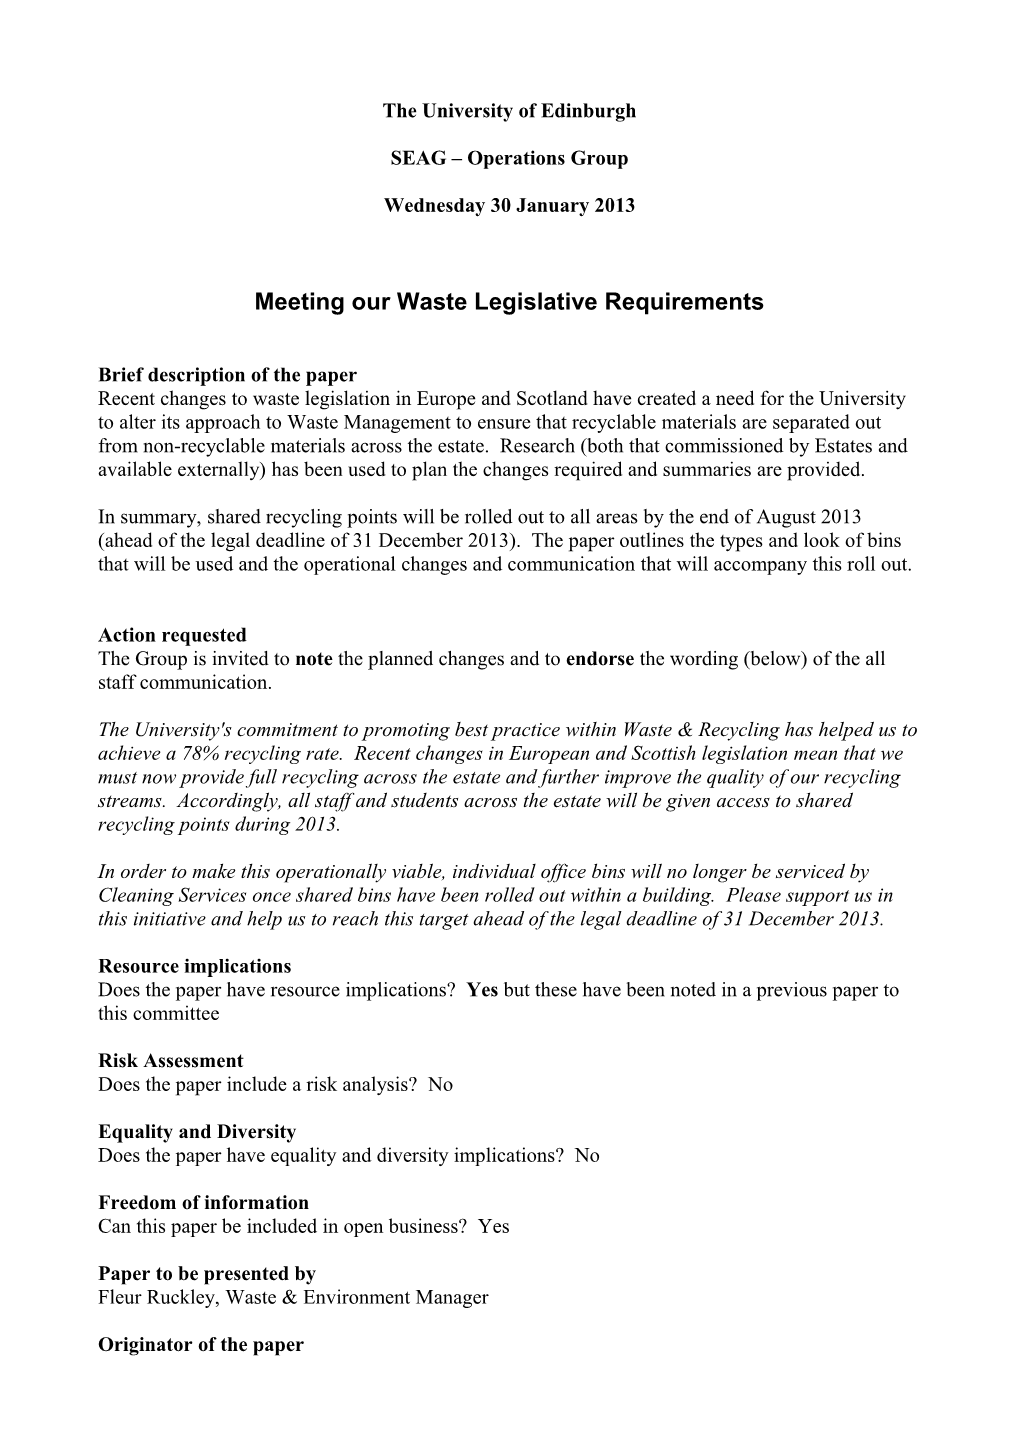 Meeting Our Waste Legislative Requirements